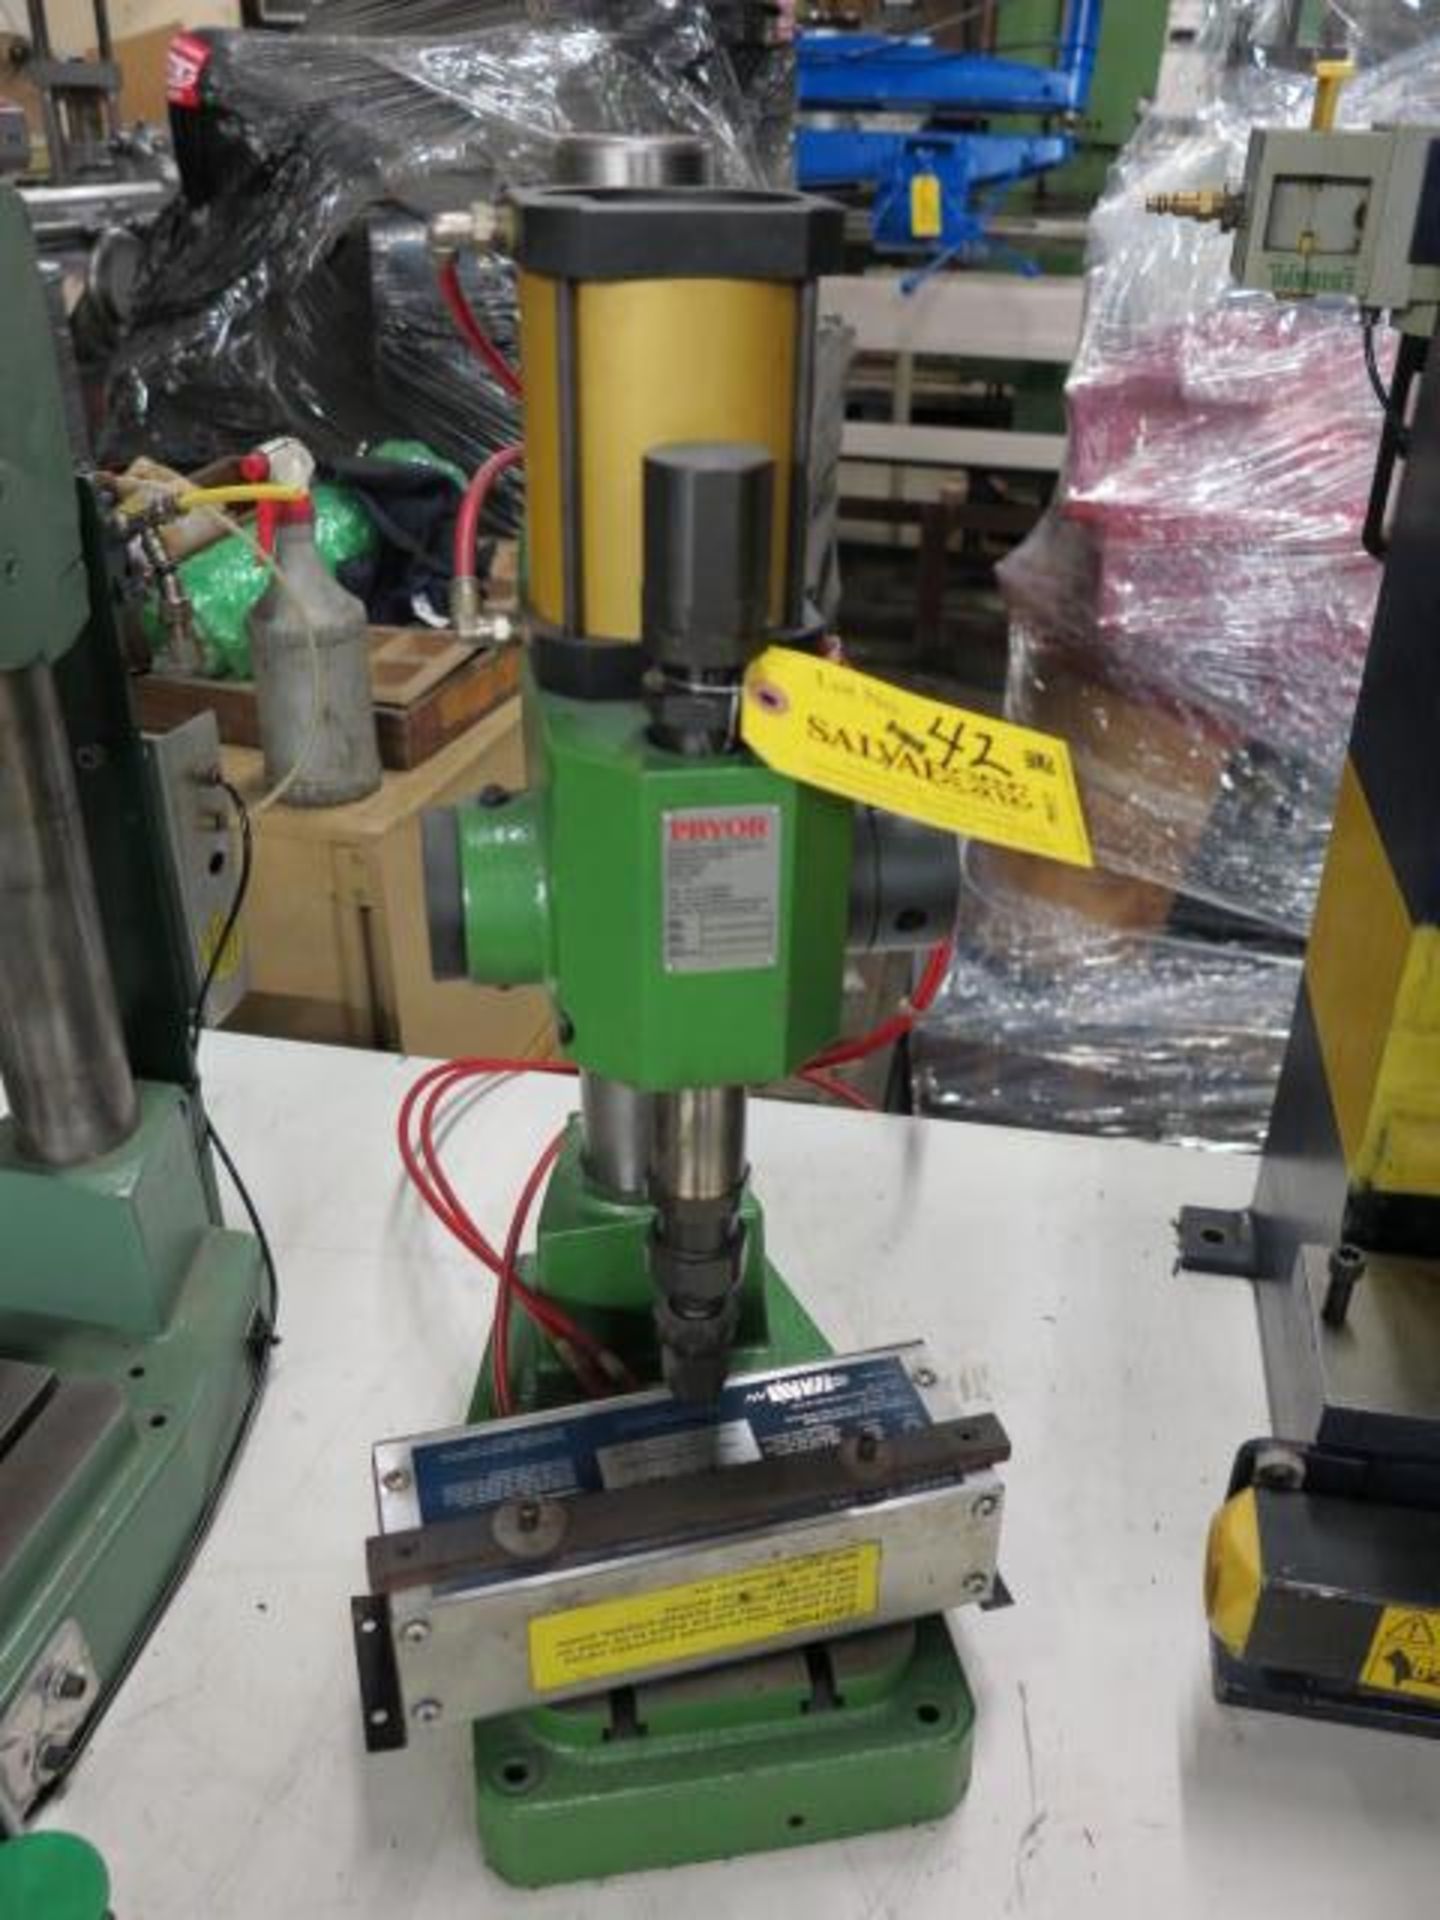 Pryor Pneumatic Marking Machine, Model 21, S/N 6960 with 2 Hand Controls, Built 2004